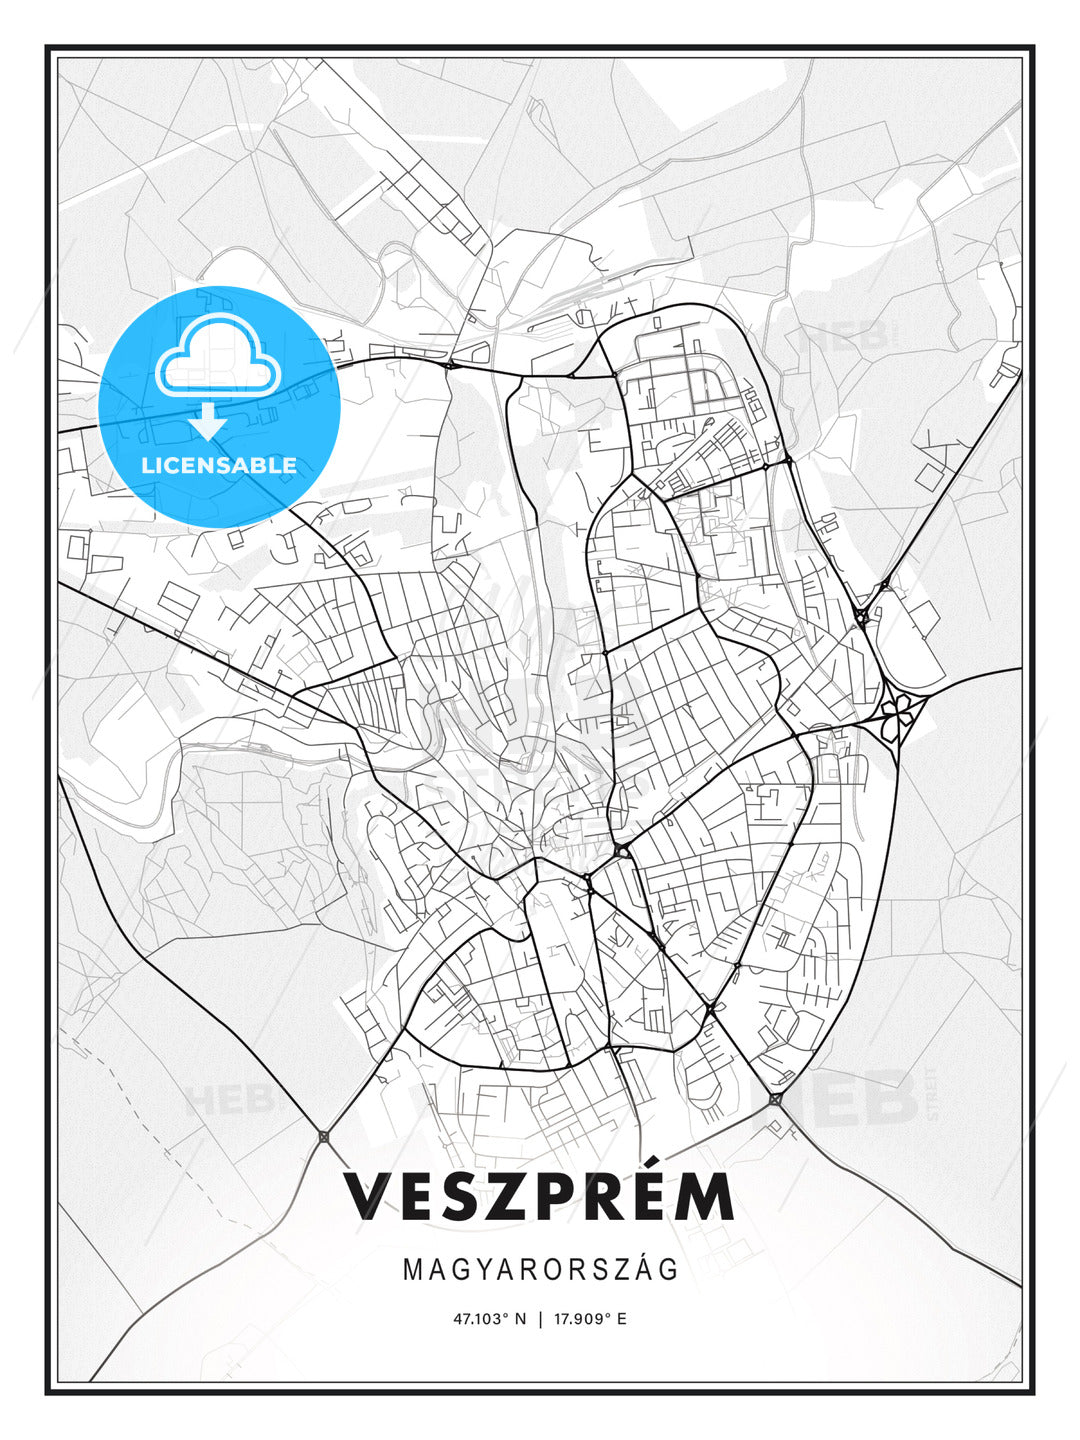 Veszprém, Hungary, Modern Print Template in Various Formats - HEBSTREITS Sketches